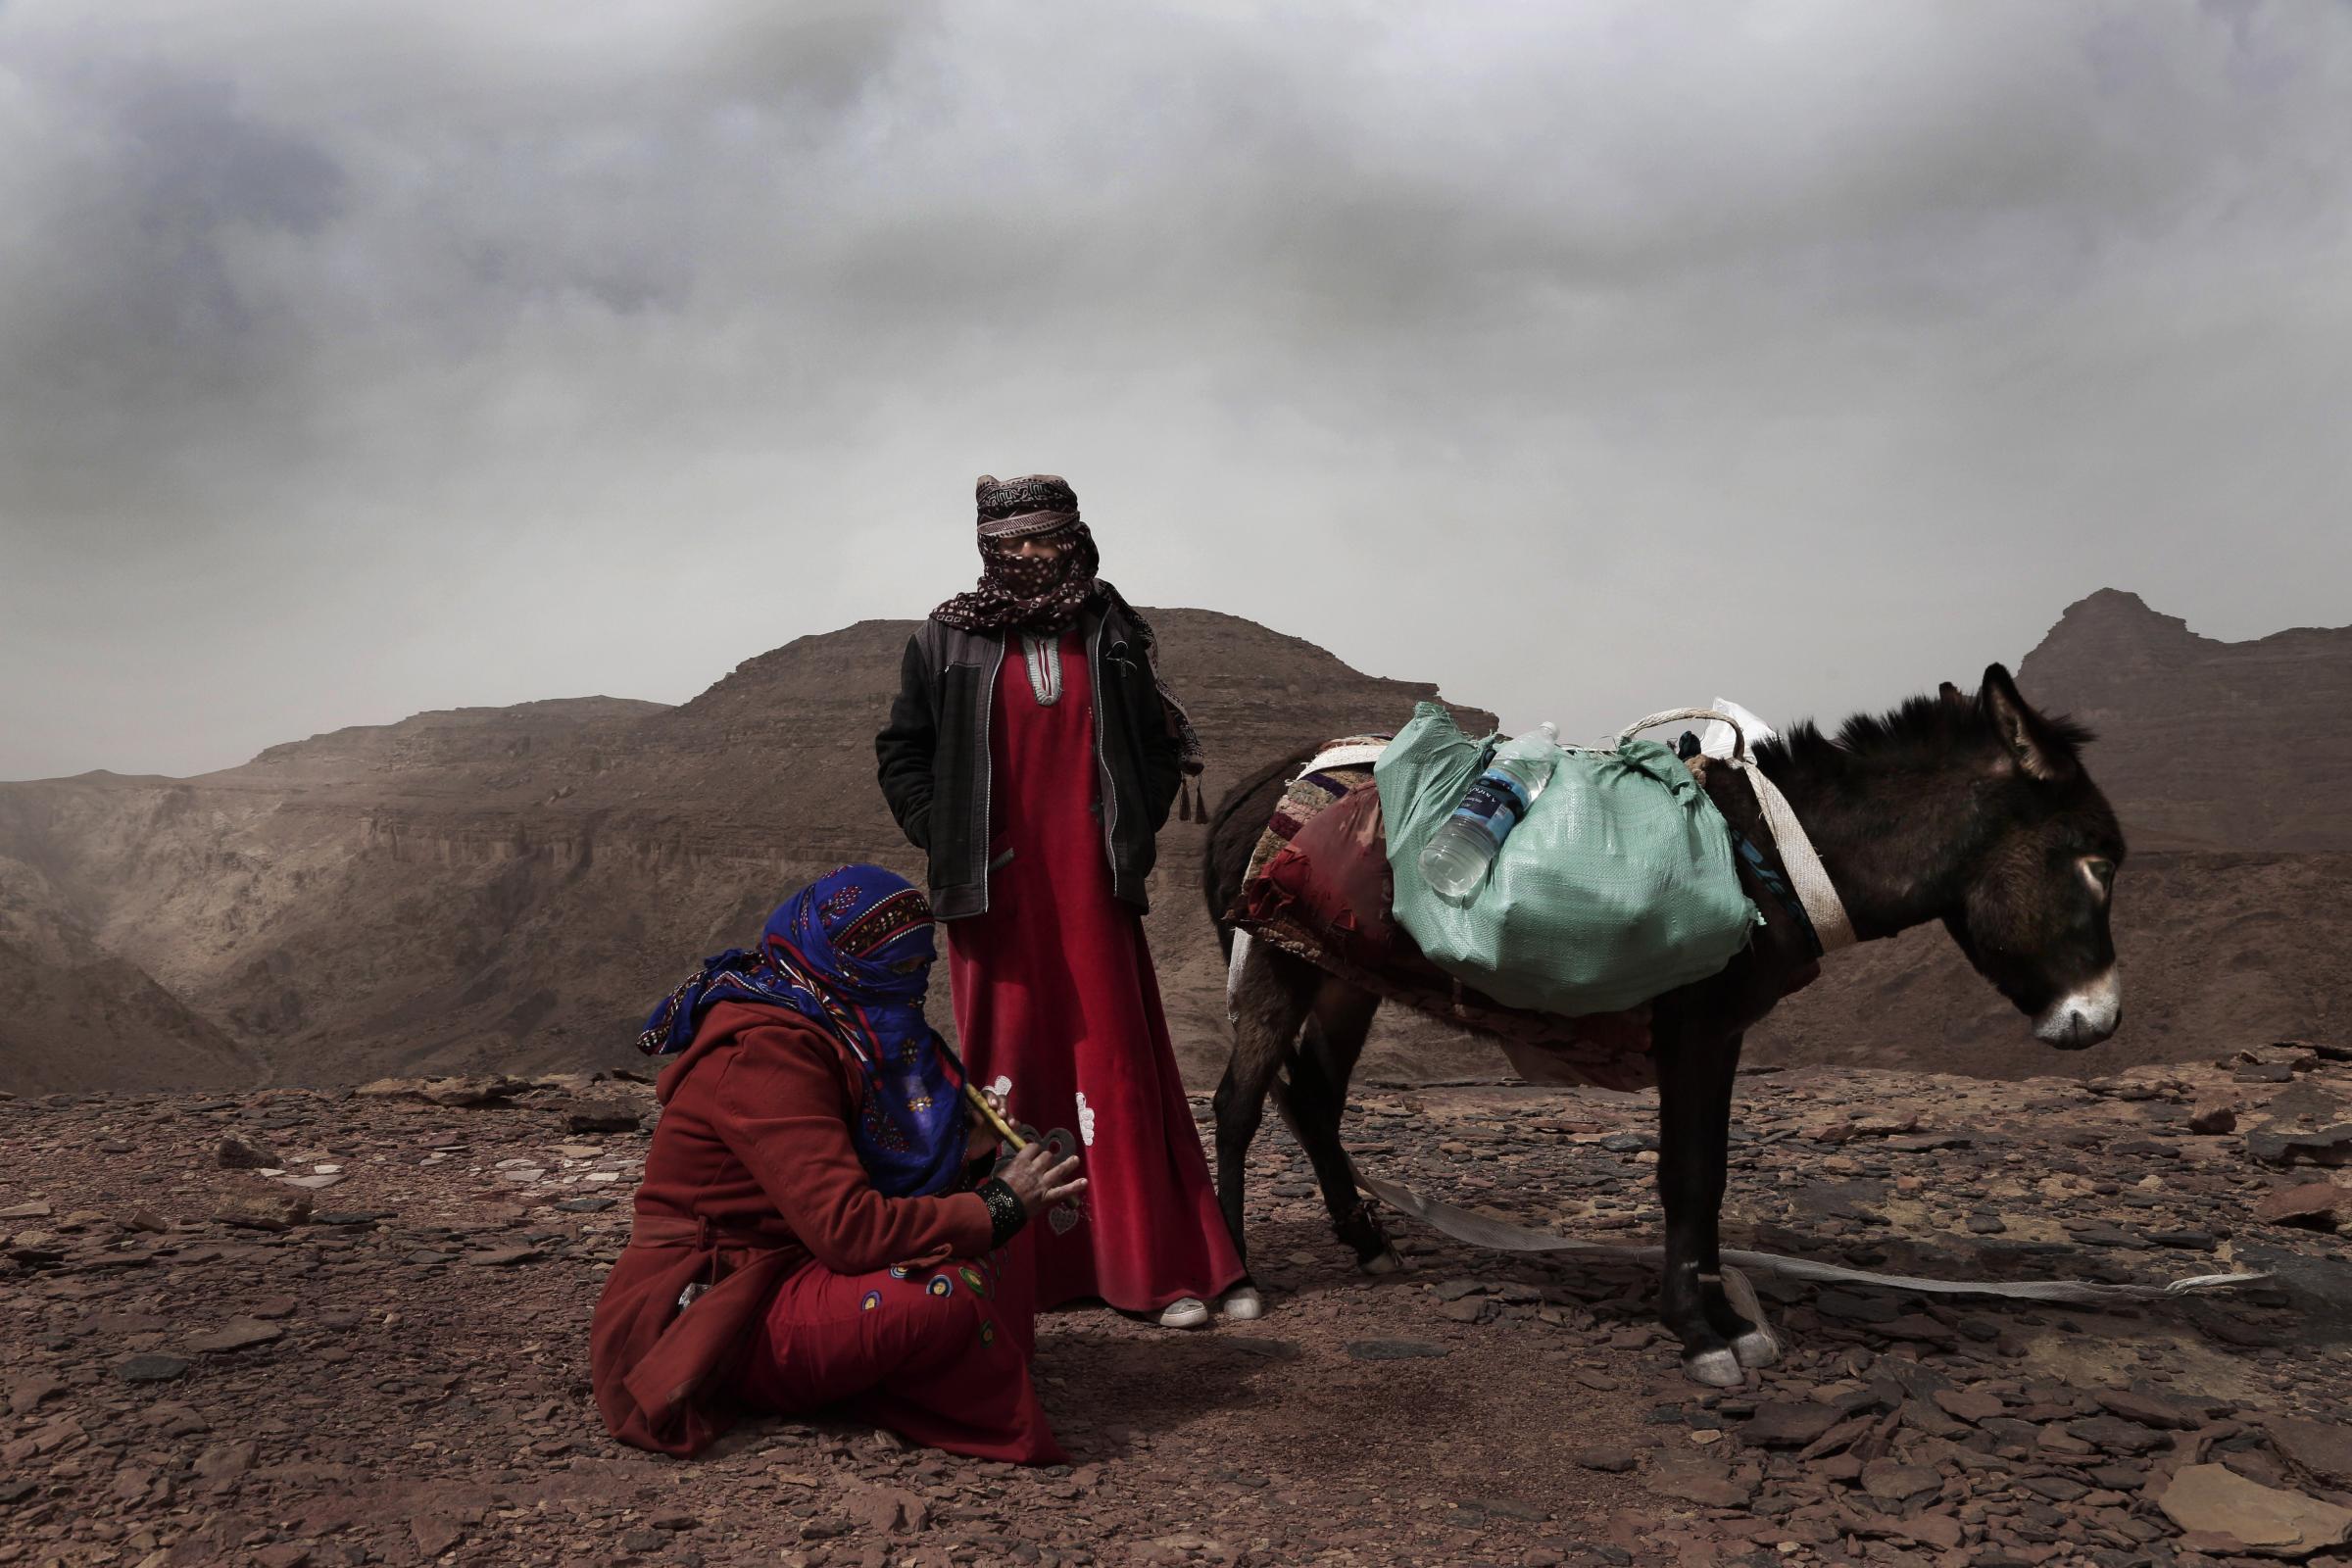 Bedouin women lead first tour in Egypt’s Sinai - Umm Yasser, the first Bedouin female guide from the...